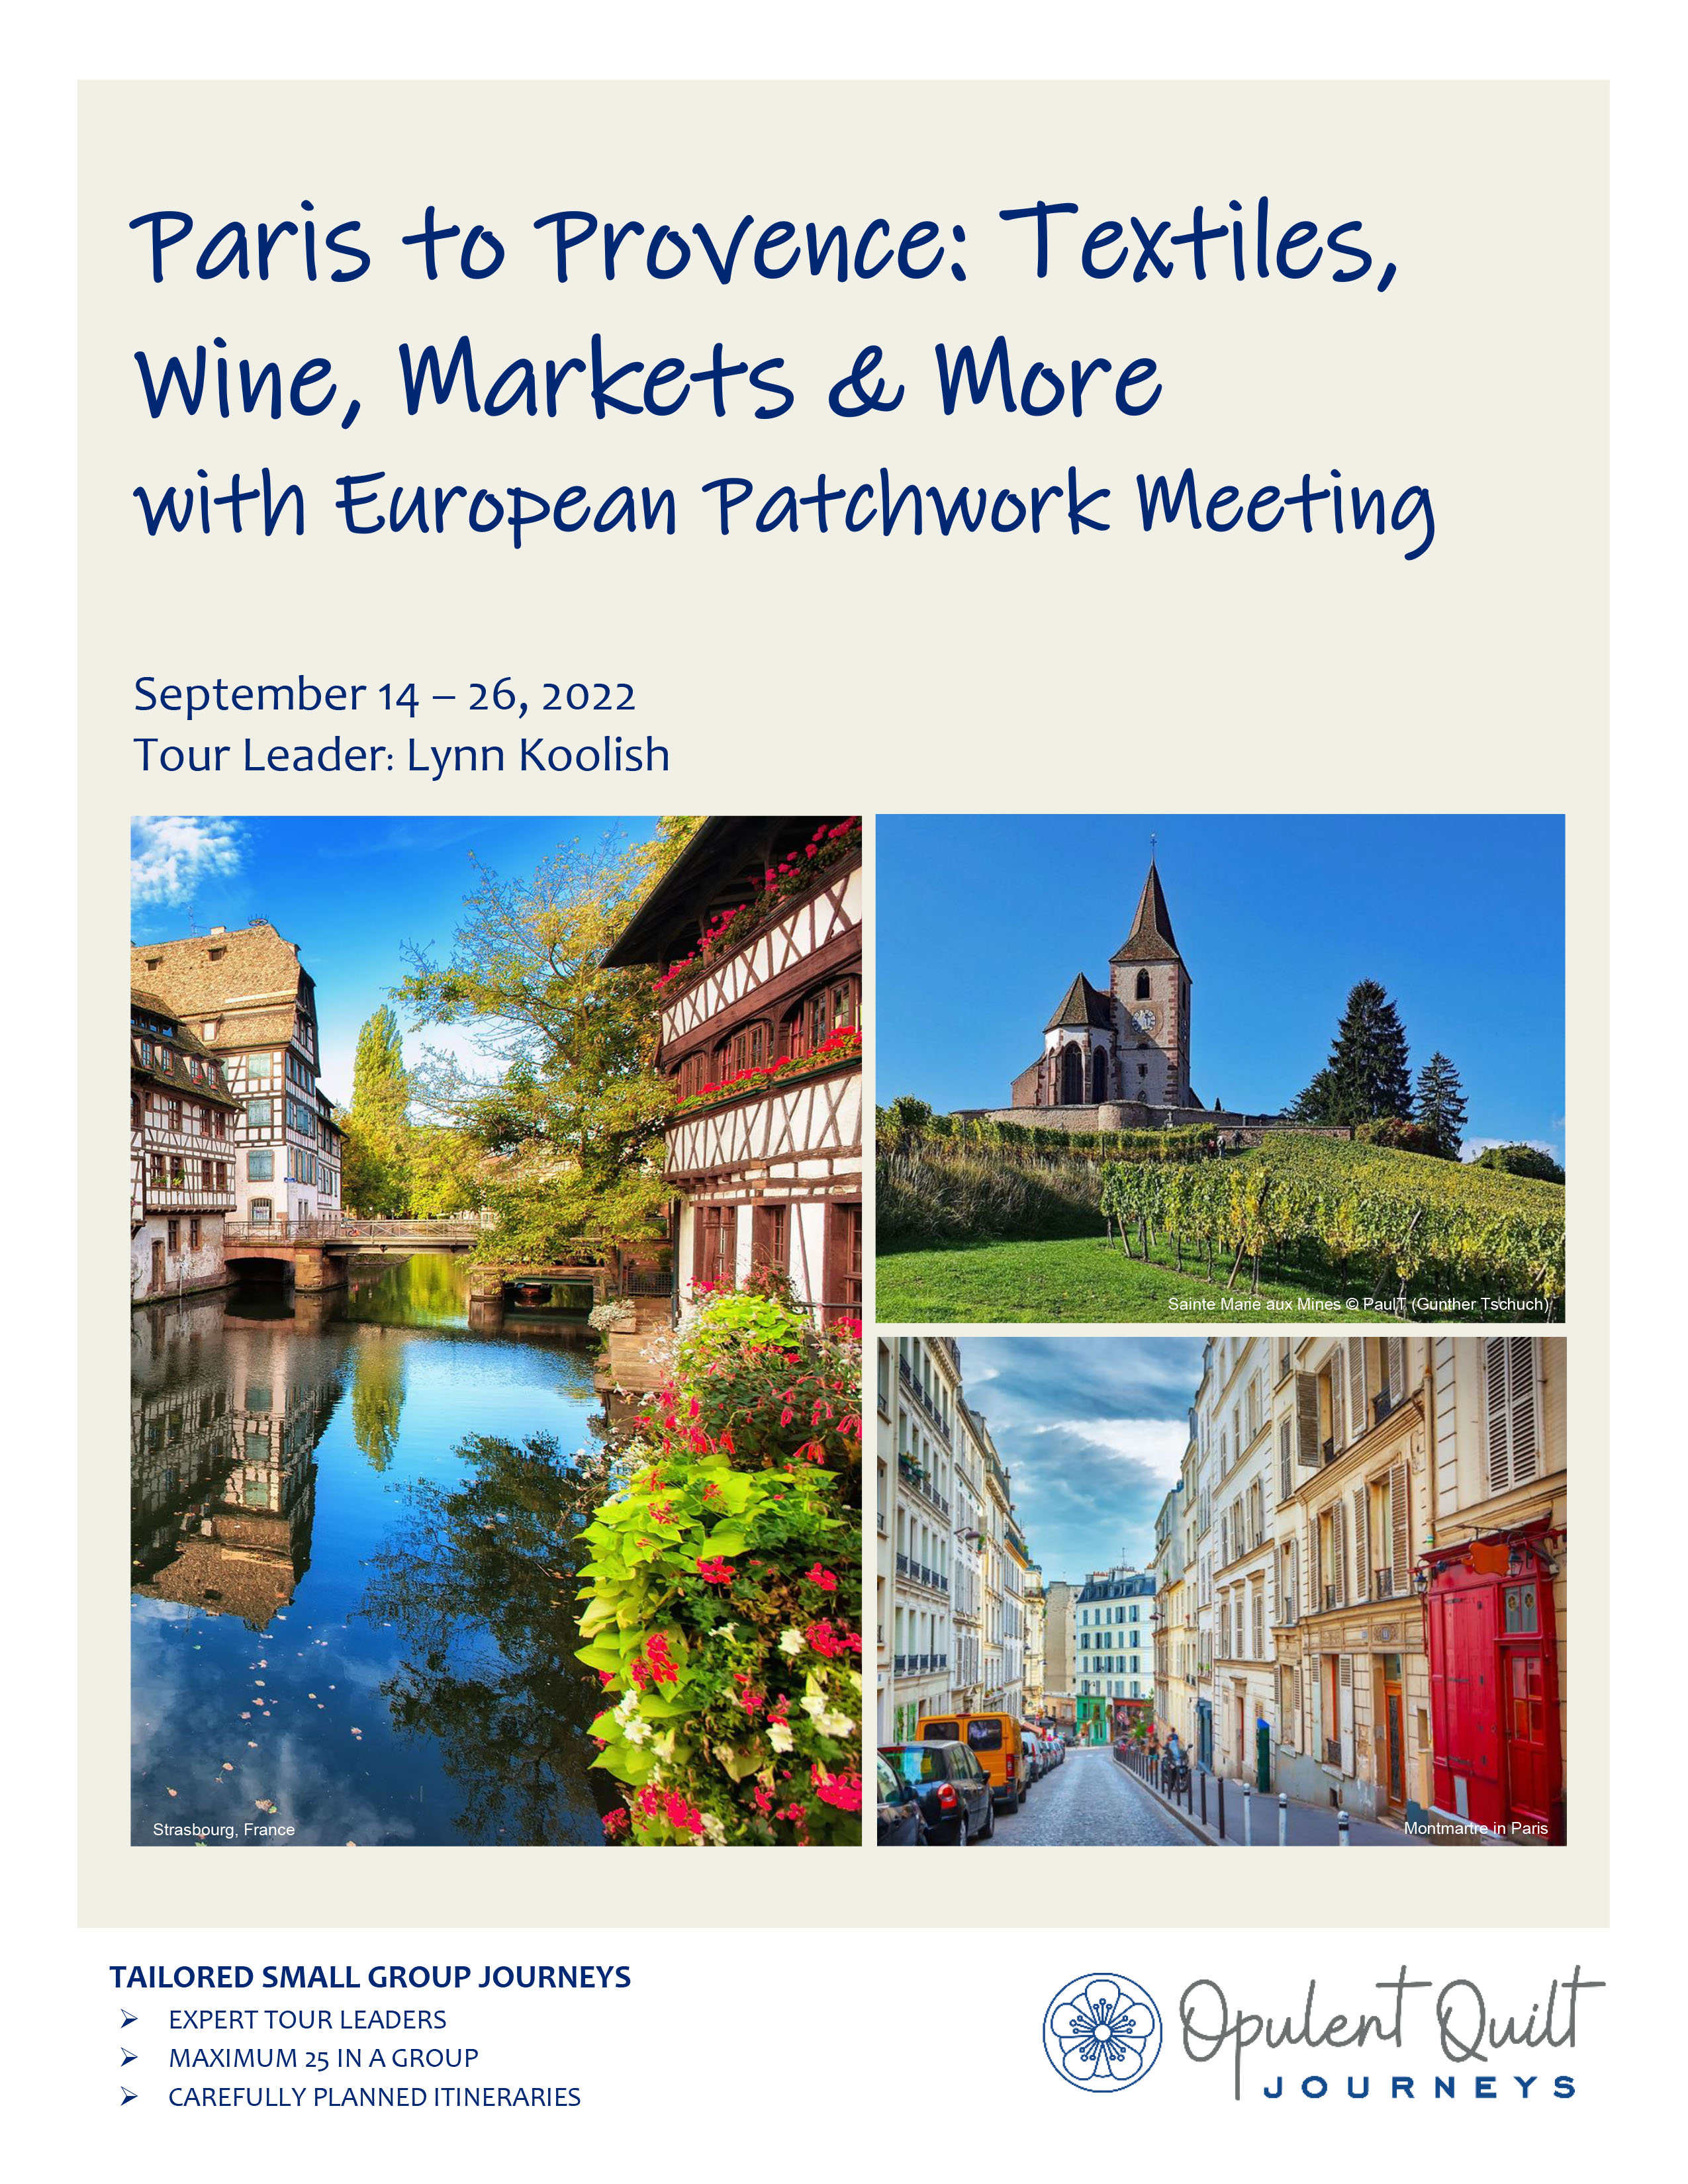 Paris to Provence: Textiles, Wine, Markets & More with European Patchwork Meeting brochure